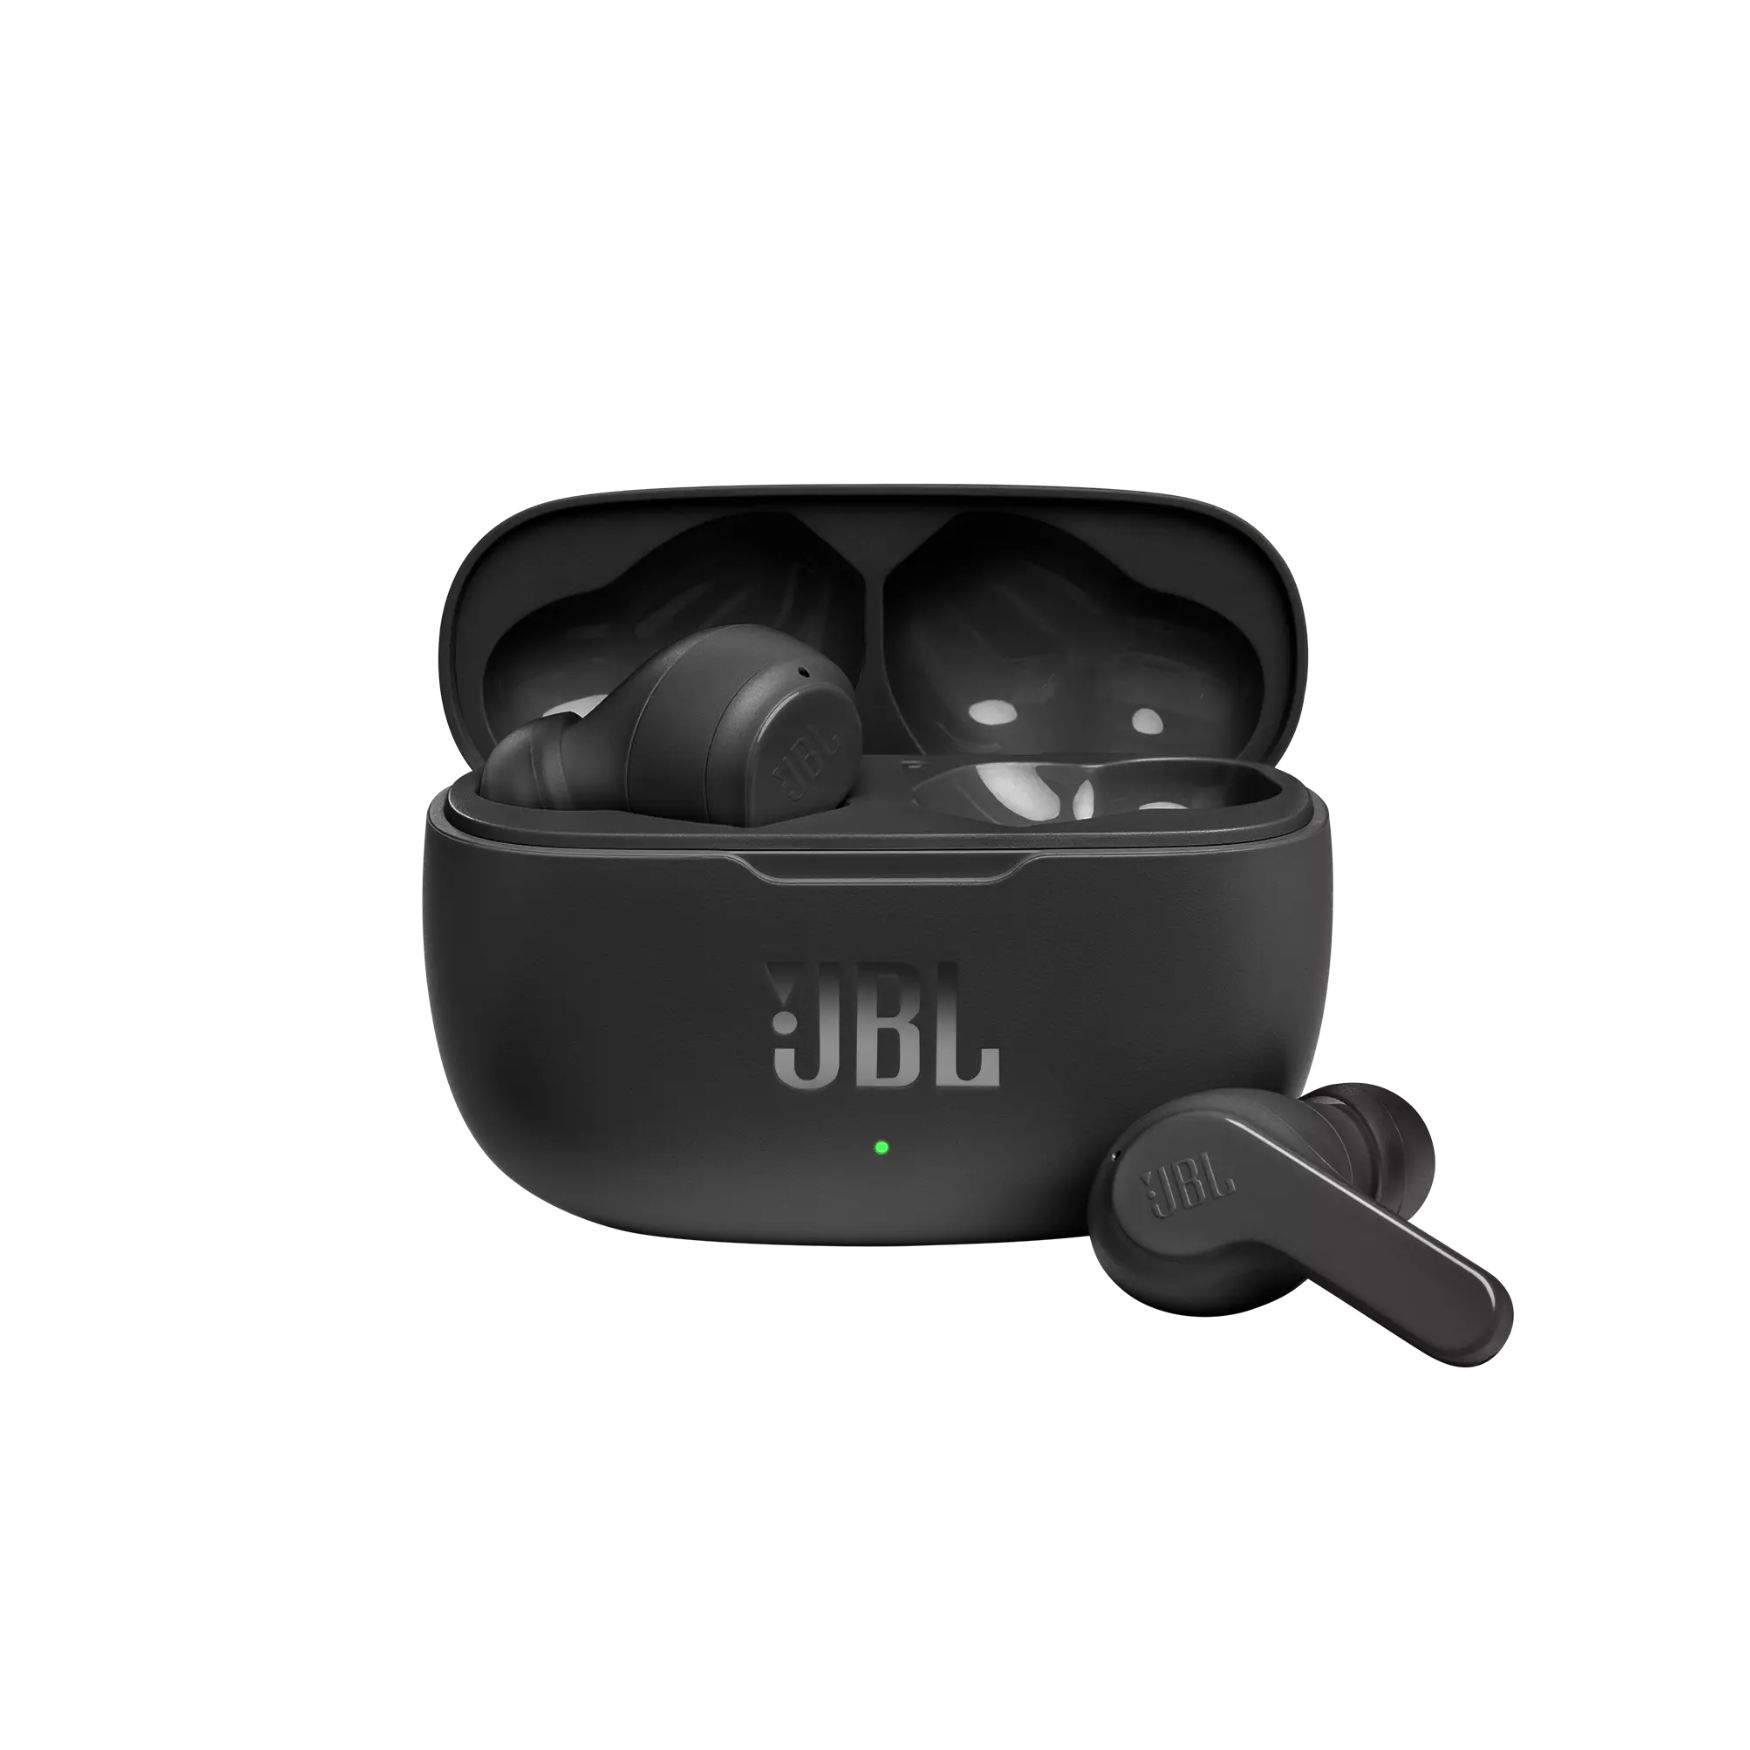 JBL Wave 200 TWS Bluetooth 5.0 True Wireless Earbuds with Built-In Microphone